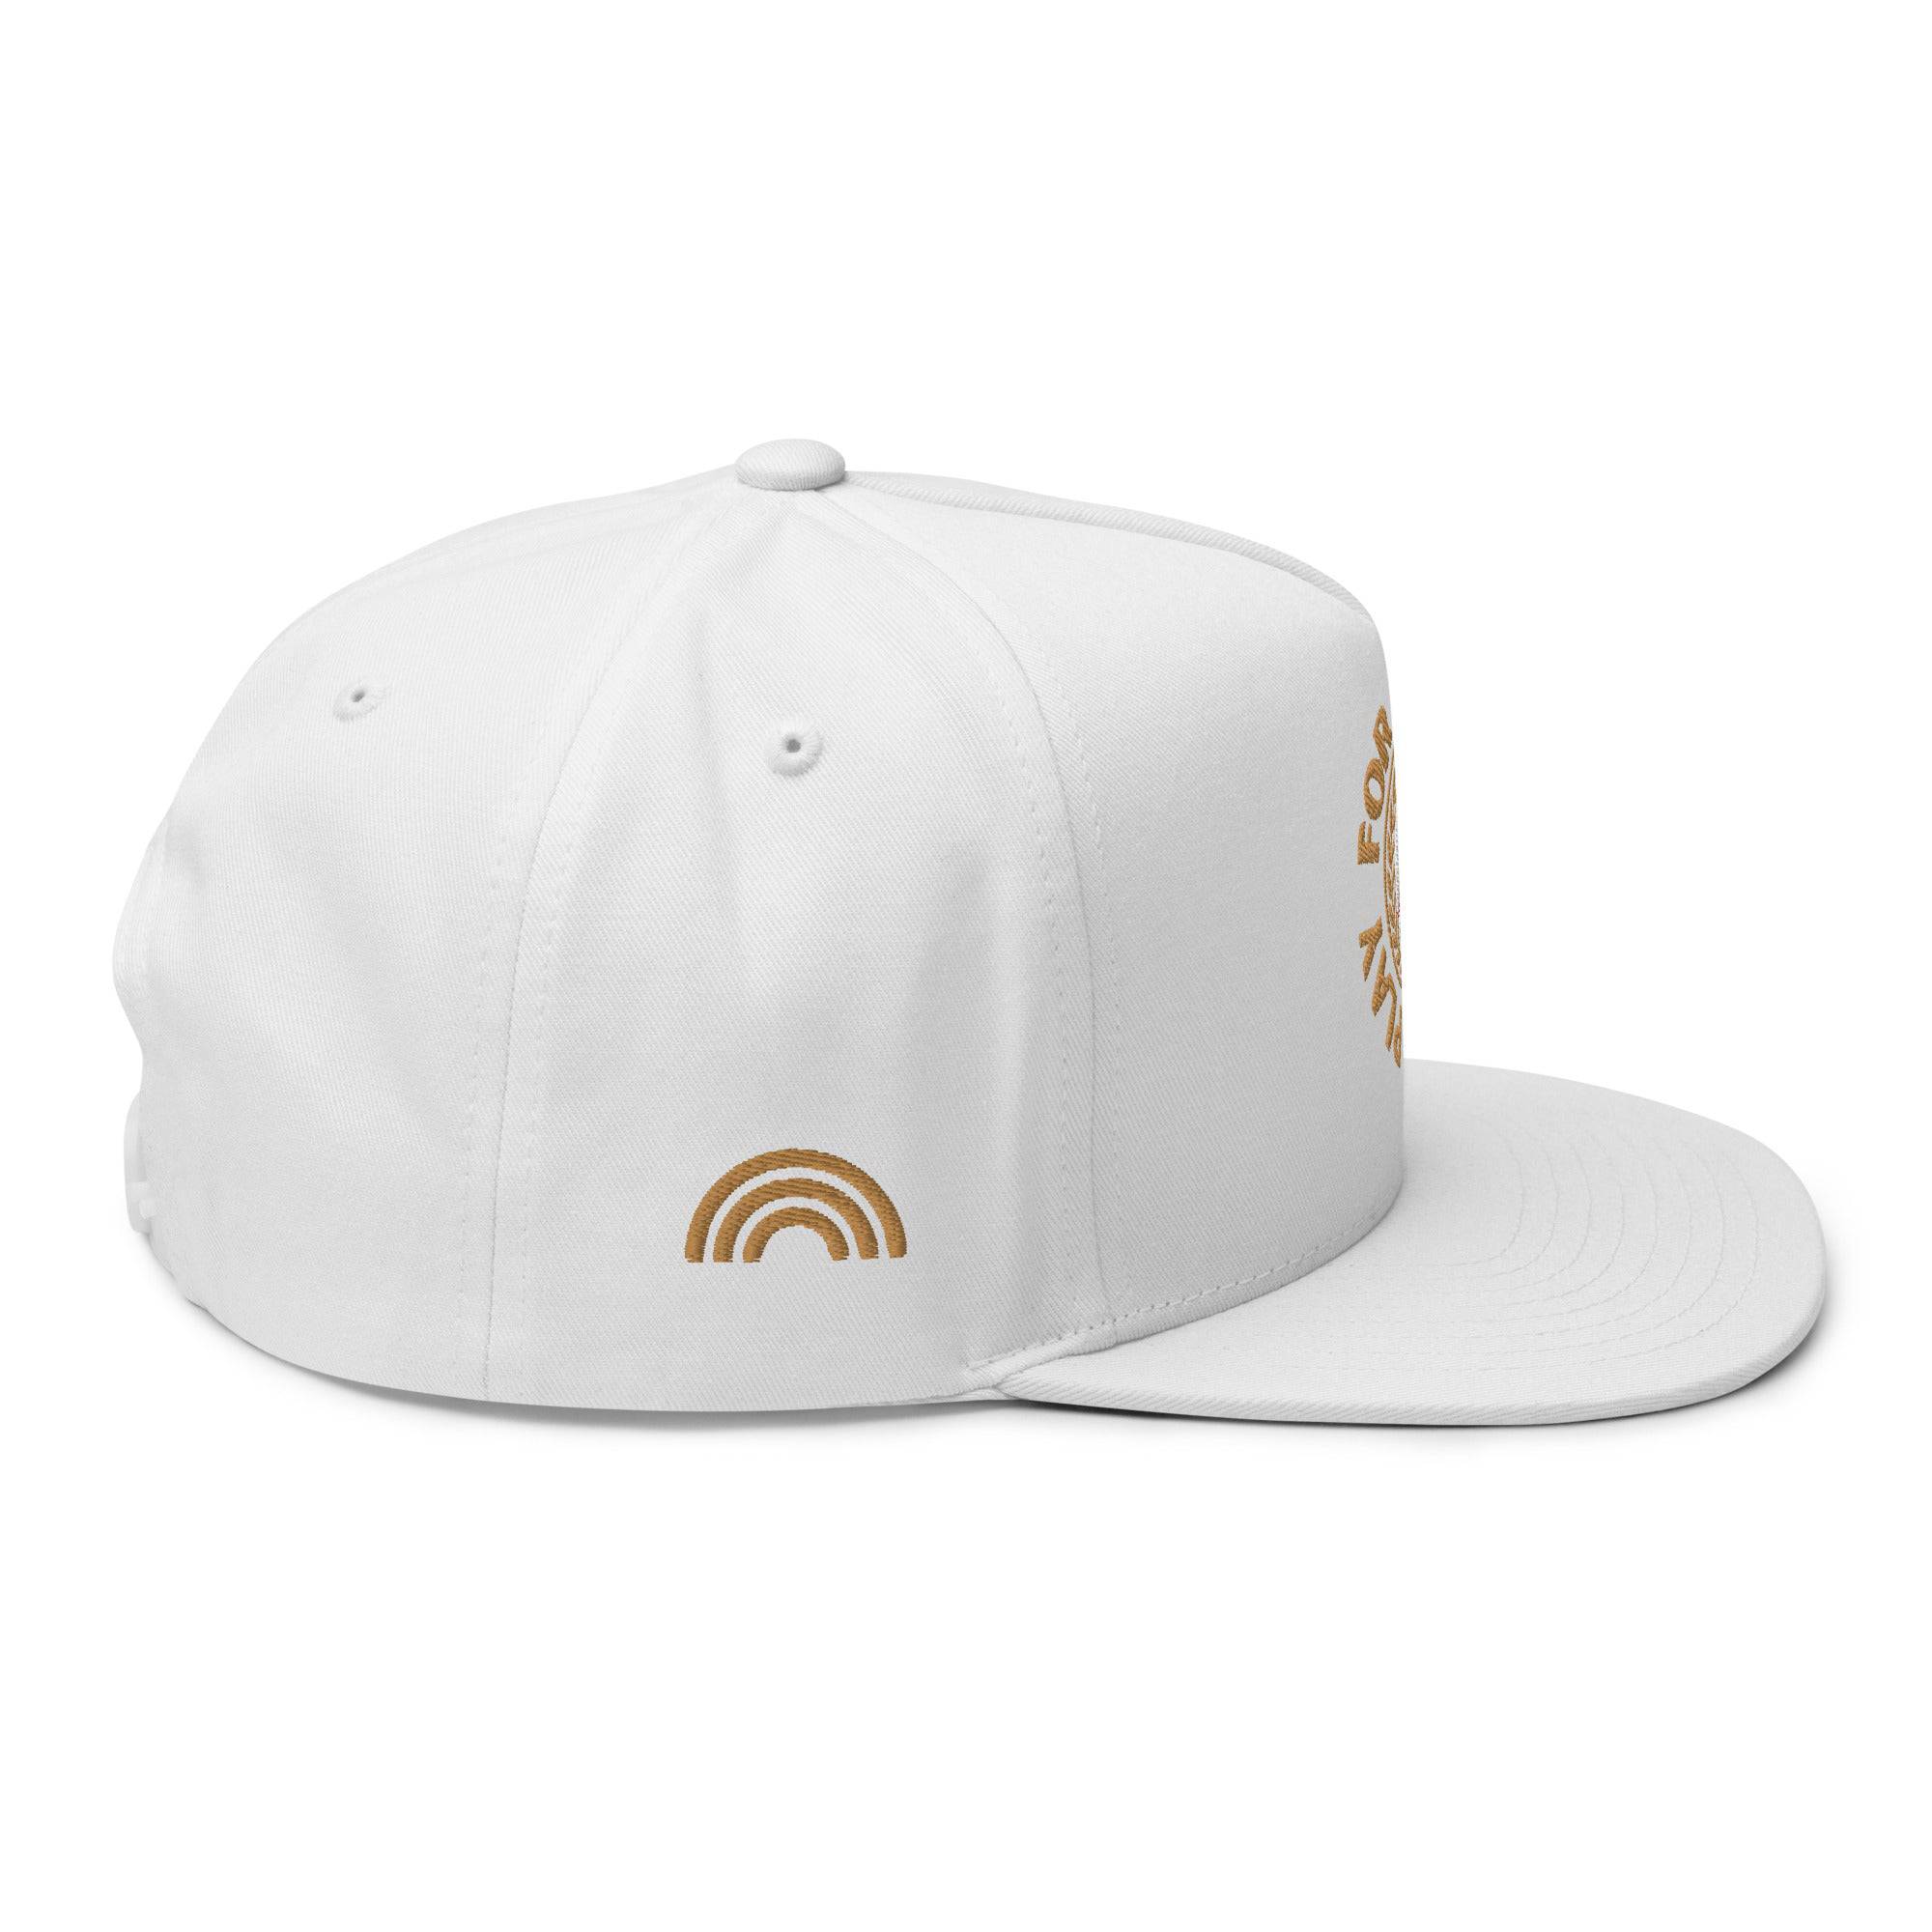 I Play For The Same Team Flat Bill Cap - Rose Gold Co. Shop